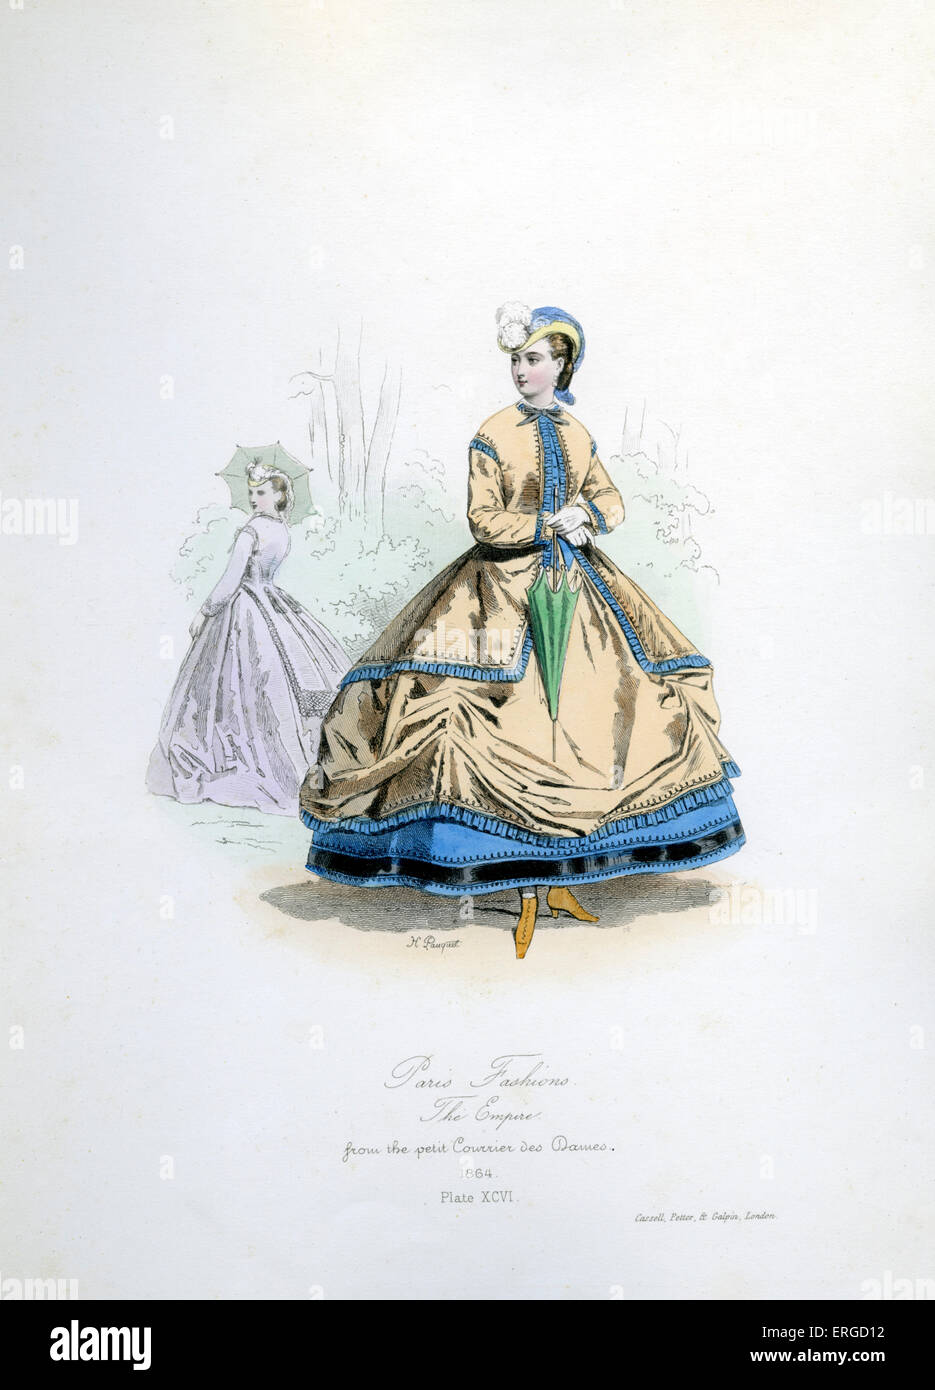 Paris Fashions at the time of the Second Empire, 1864 - from engraving by Hippolyte Pauquet from the petit Courrier des Dames. Stock Photo